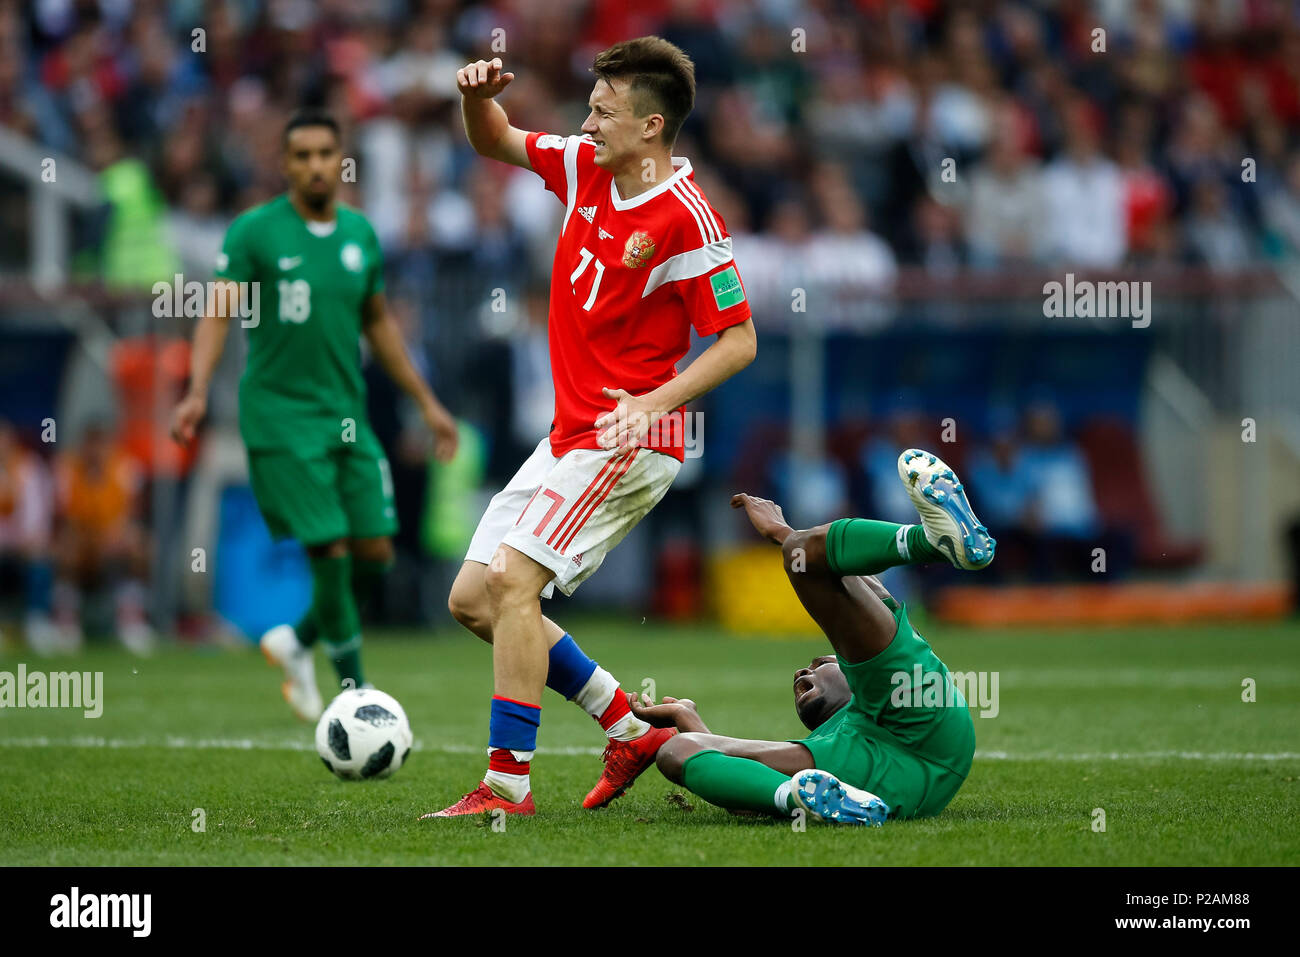 Moscow, Russia. 14th June 2018. Mohammed Al-Breik of Saudi Arabia is fouled by Aleksandr Golovin of Russia during the 2018 FIFA World Cup Group A match between Russia and Saudi Arabia at Luzhniki Stadium on June 14th 2018 in Moscow, Russia. Credit: PHC Images/Alamy Live News Stock Photo